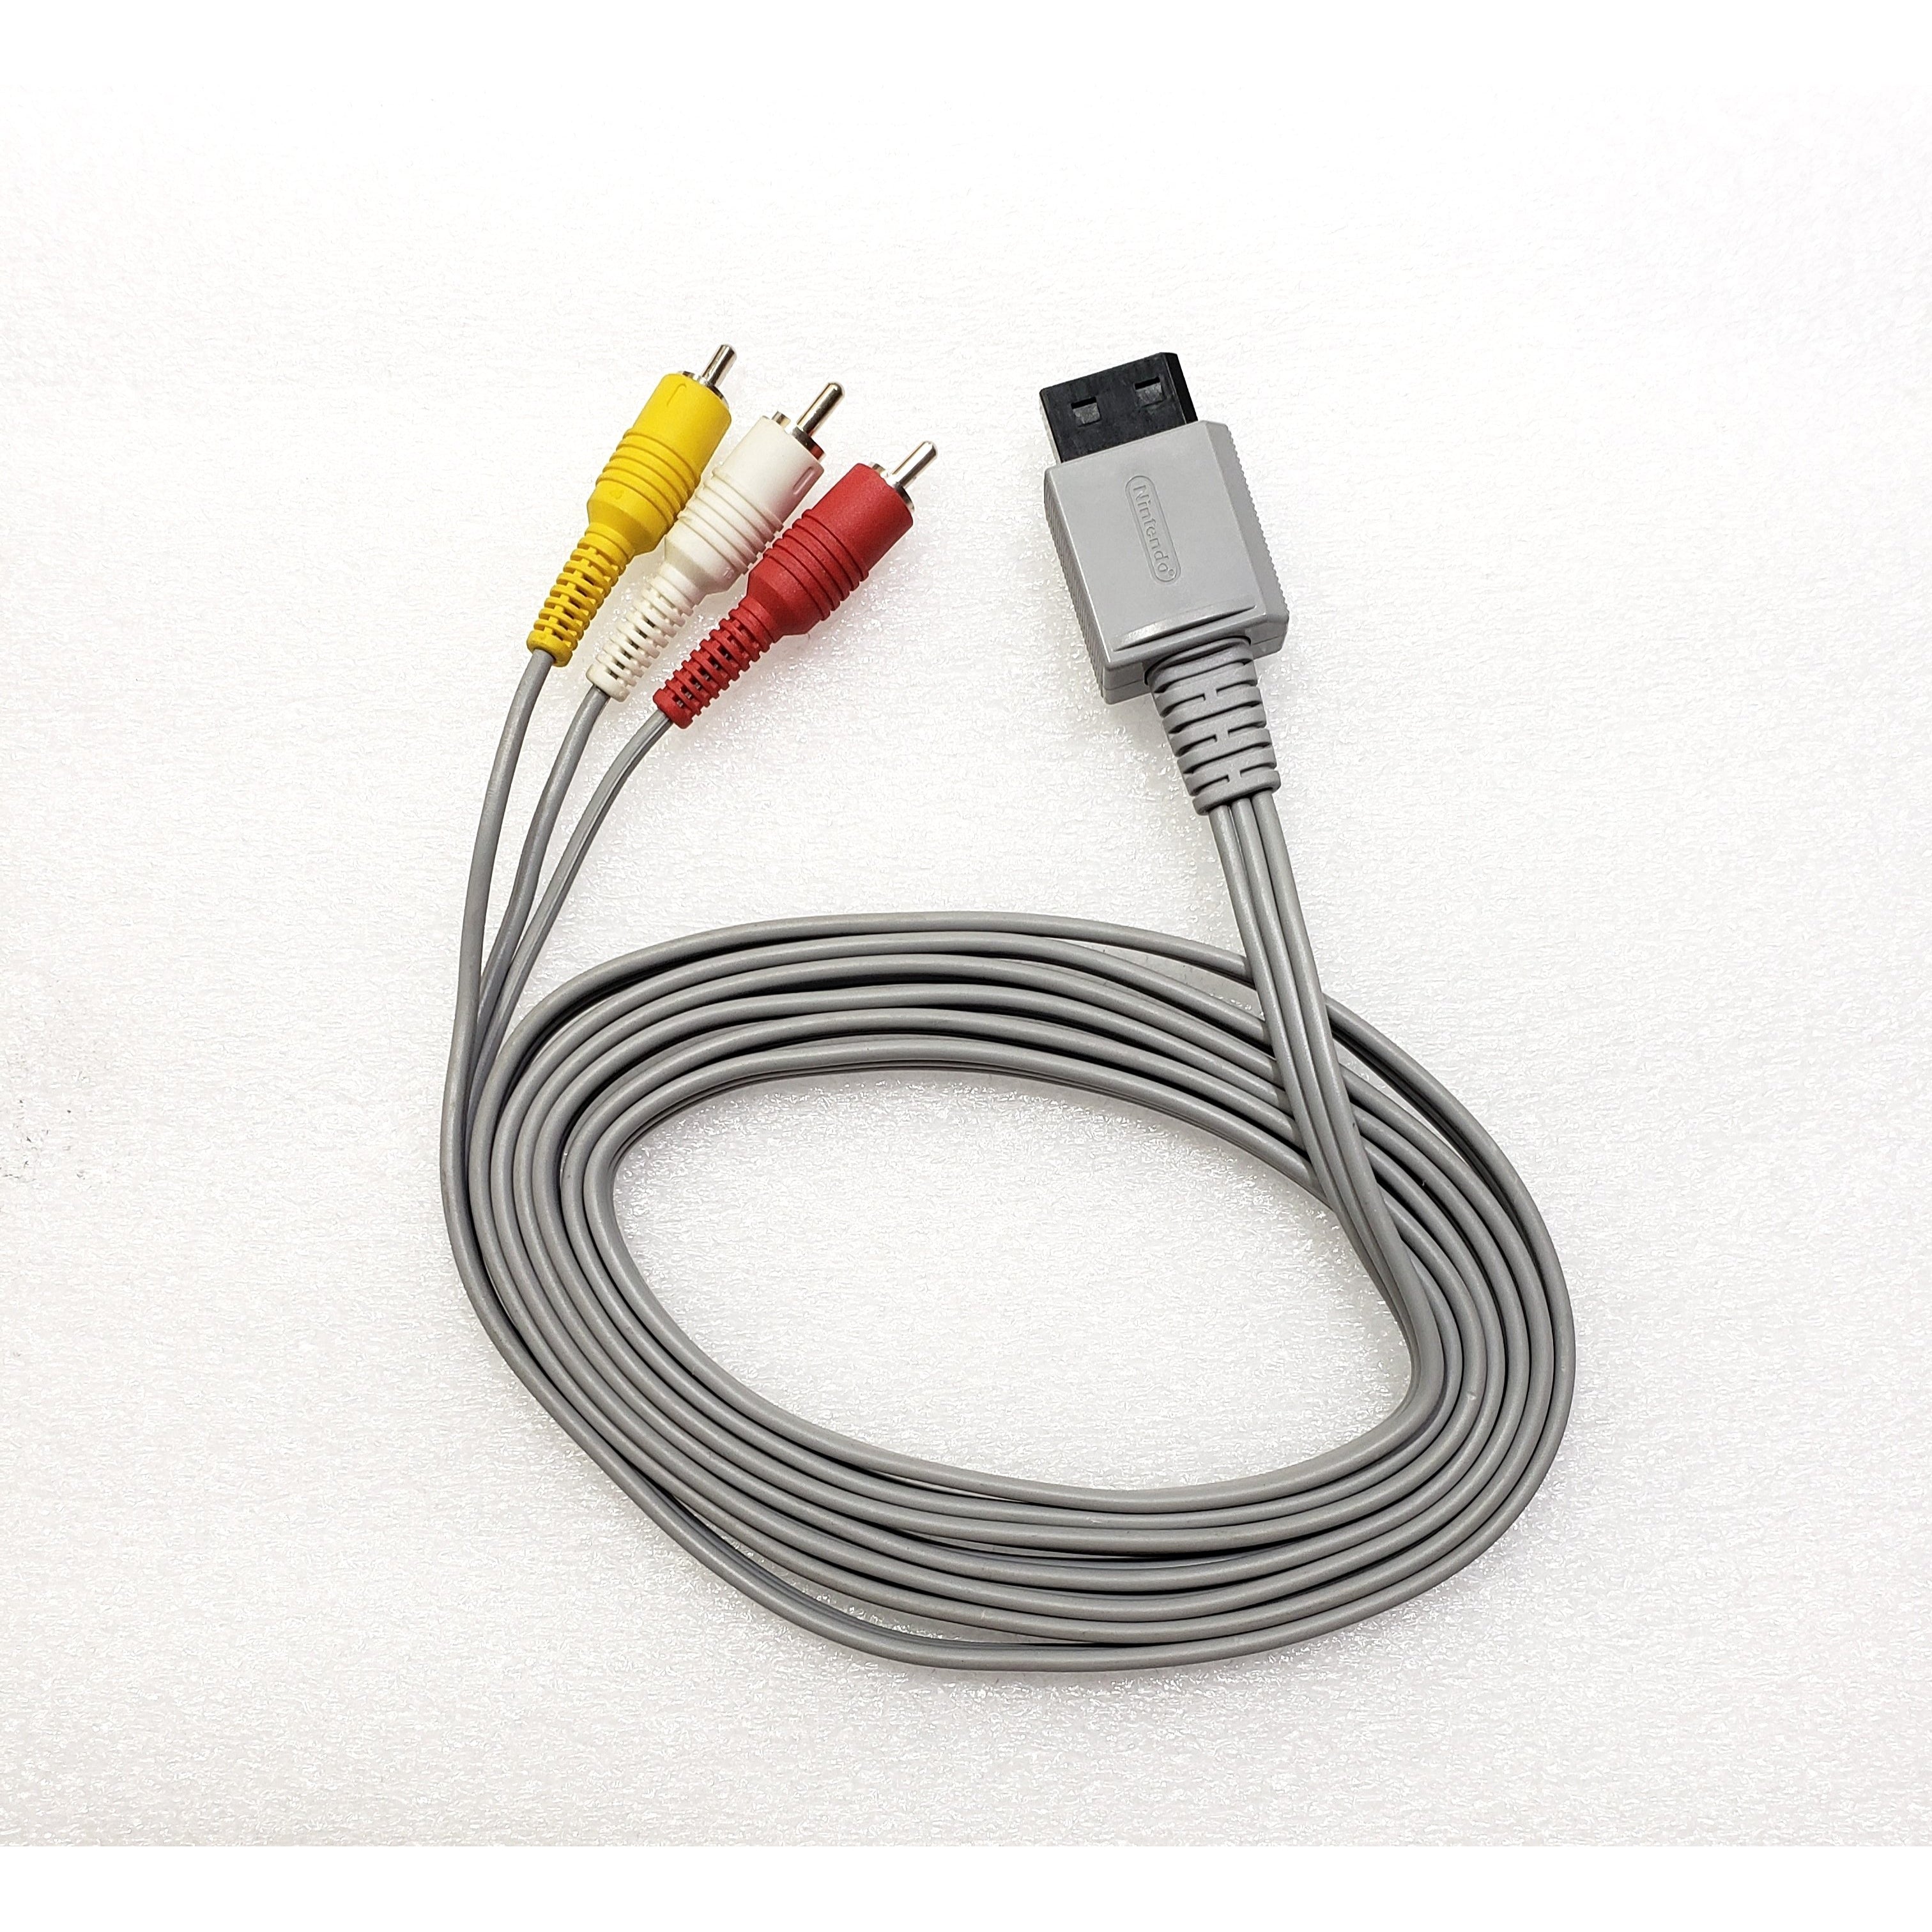 Nintendo Wii Official RCA Composite AV Cable - YourGamingShop.com - Buy, Sell, Trade Video Games Online. 120 Day Warranty. Satisfaction Guaranteed.